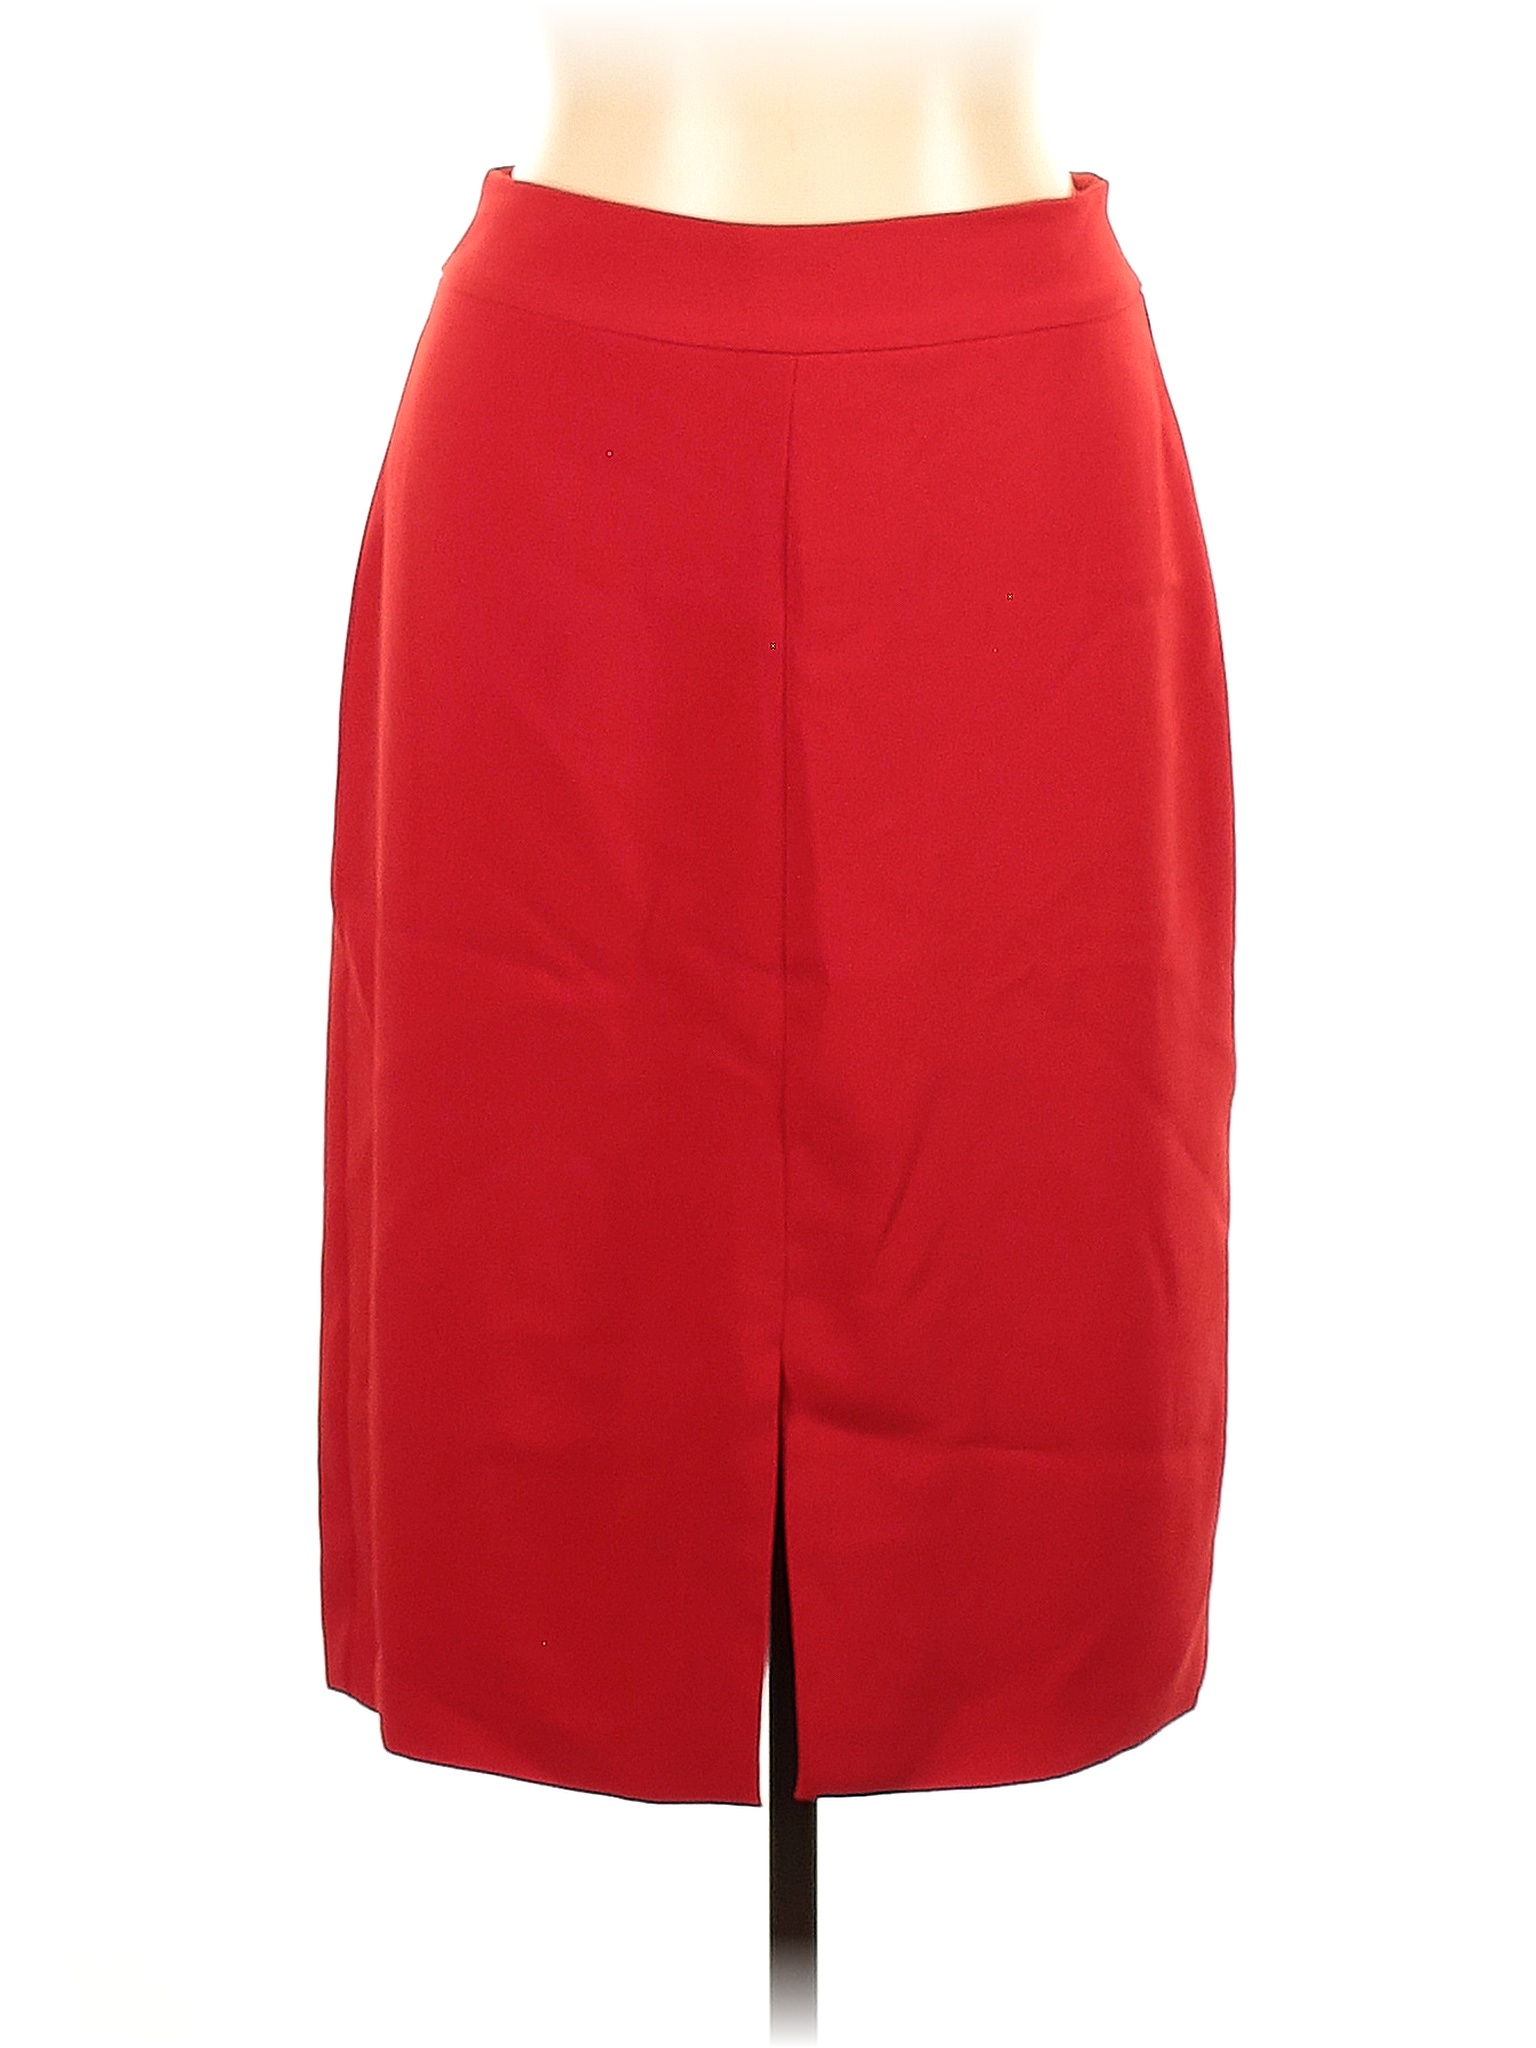 Court & Rowe Solid Colored Red Casual Skirt Size 10 - 92% off | thredUP